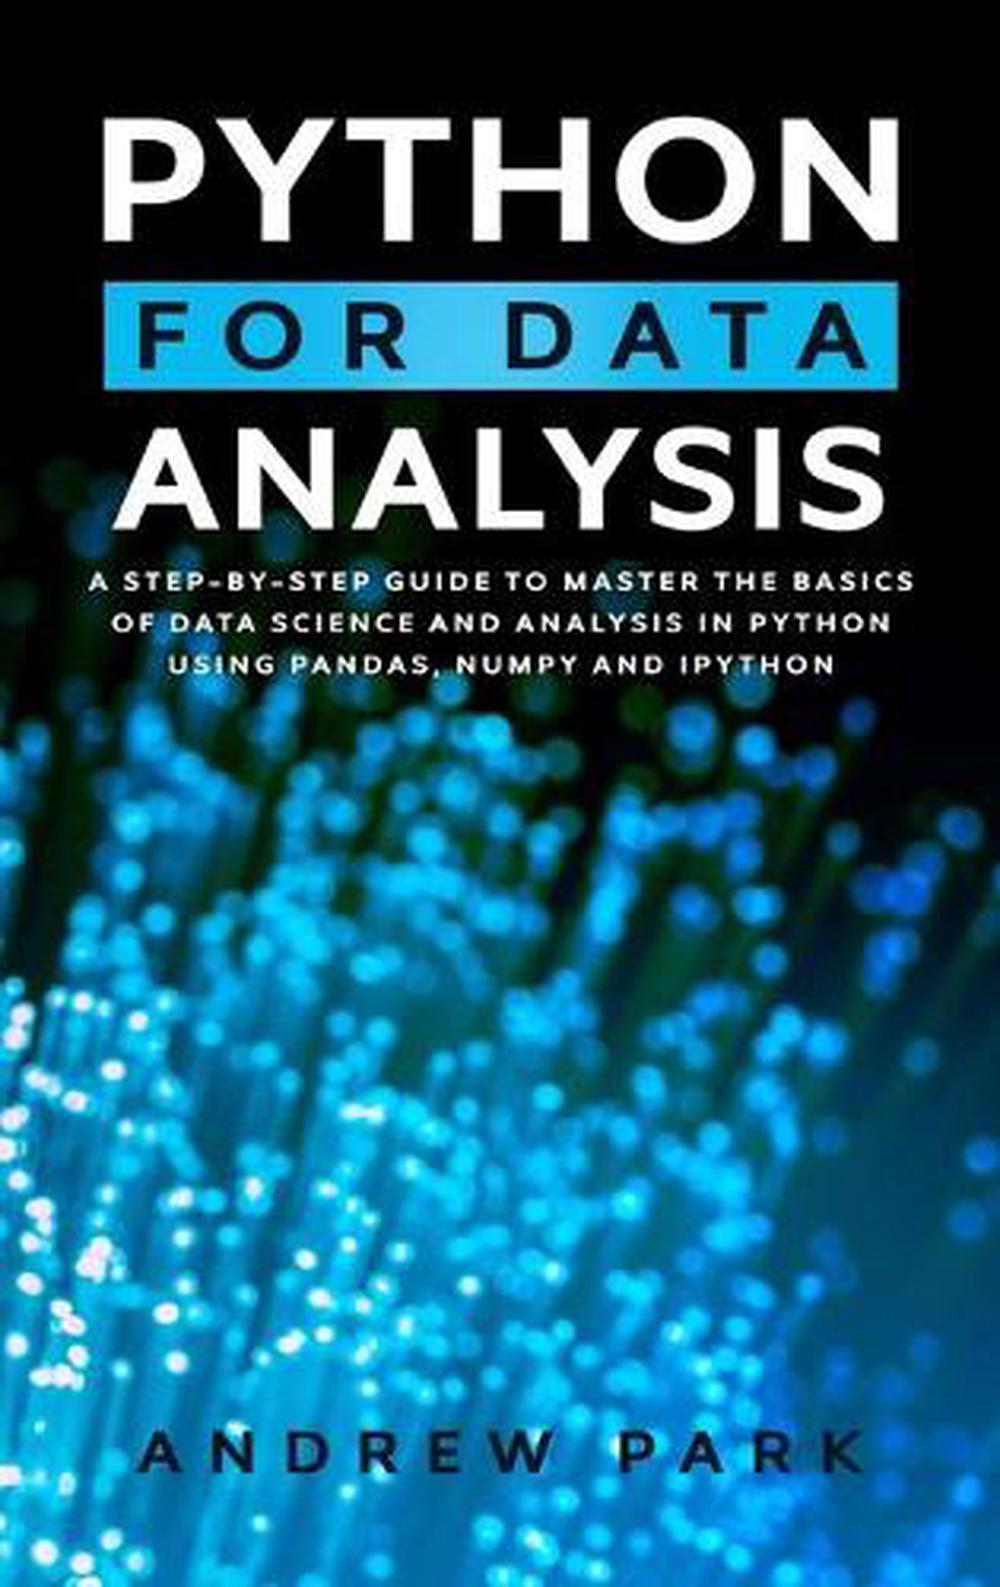 Python For Data Analysis By Andrew Park English Hardcover Book Free 4611